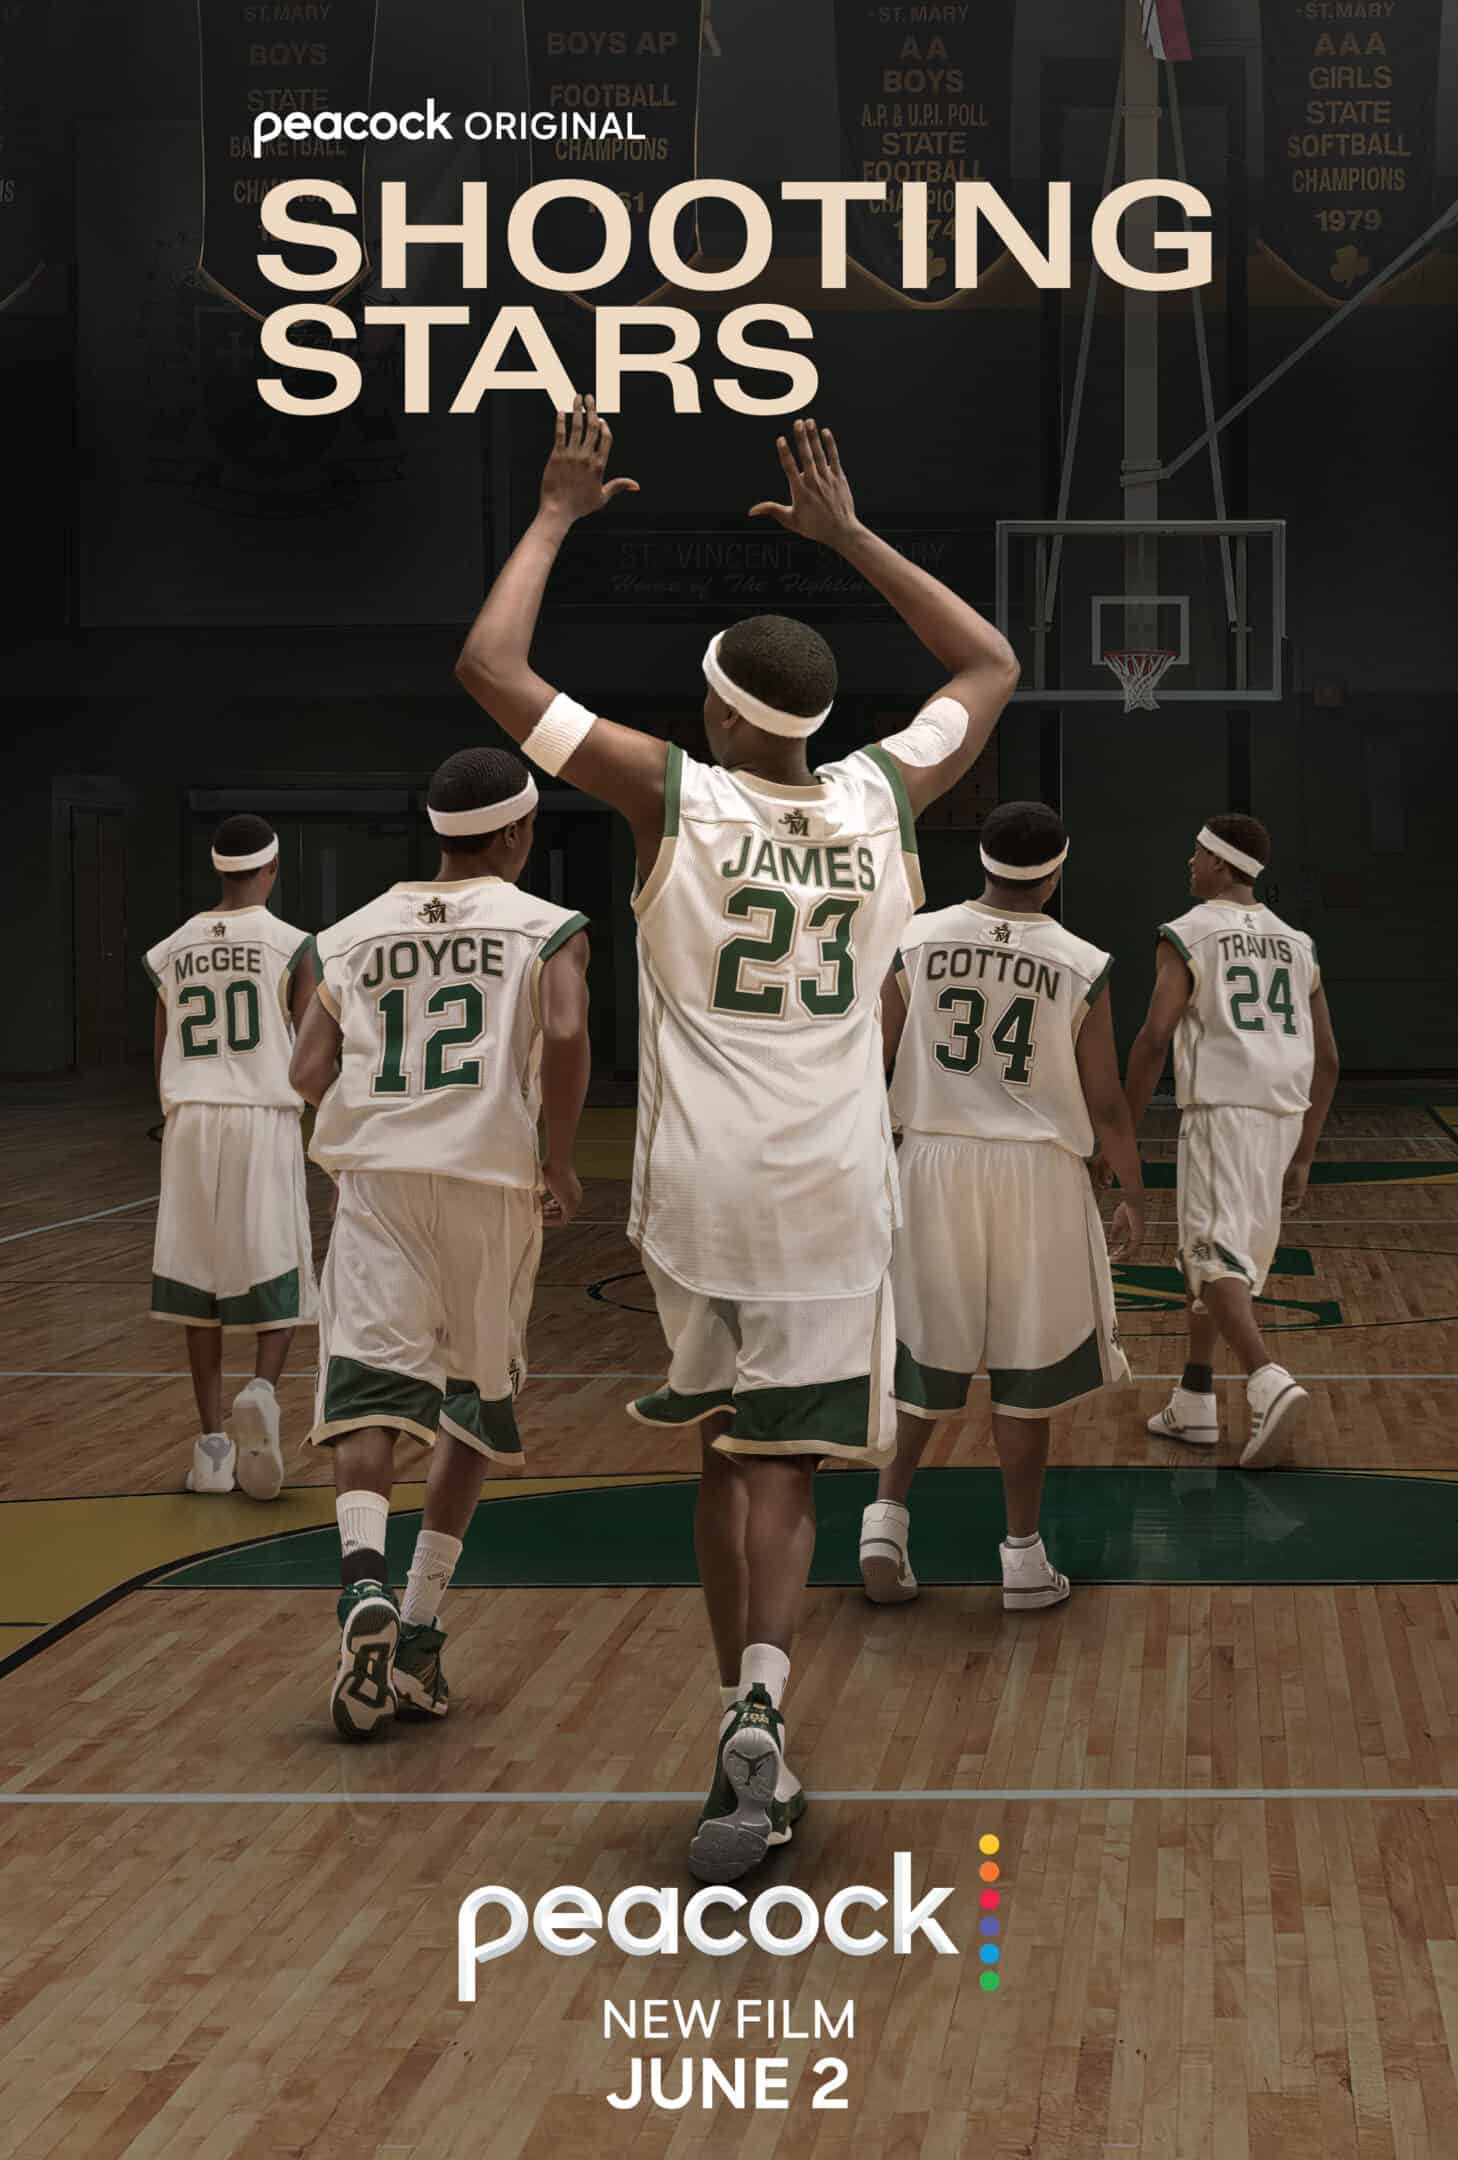 Check out the trailer for Shooting Stars 19